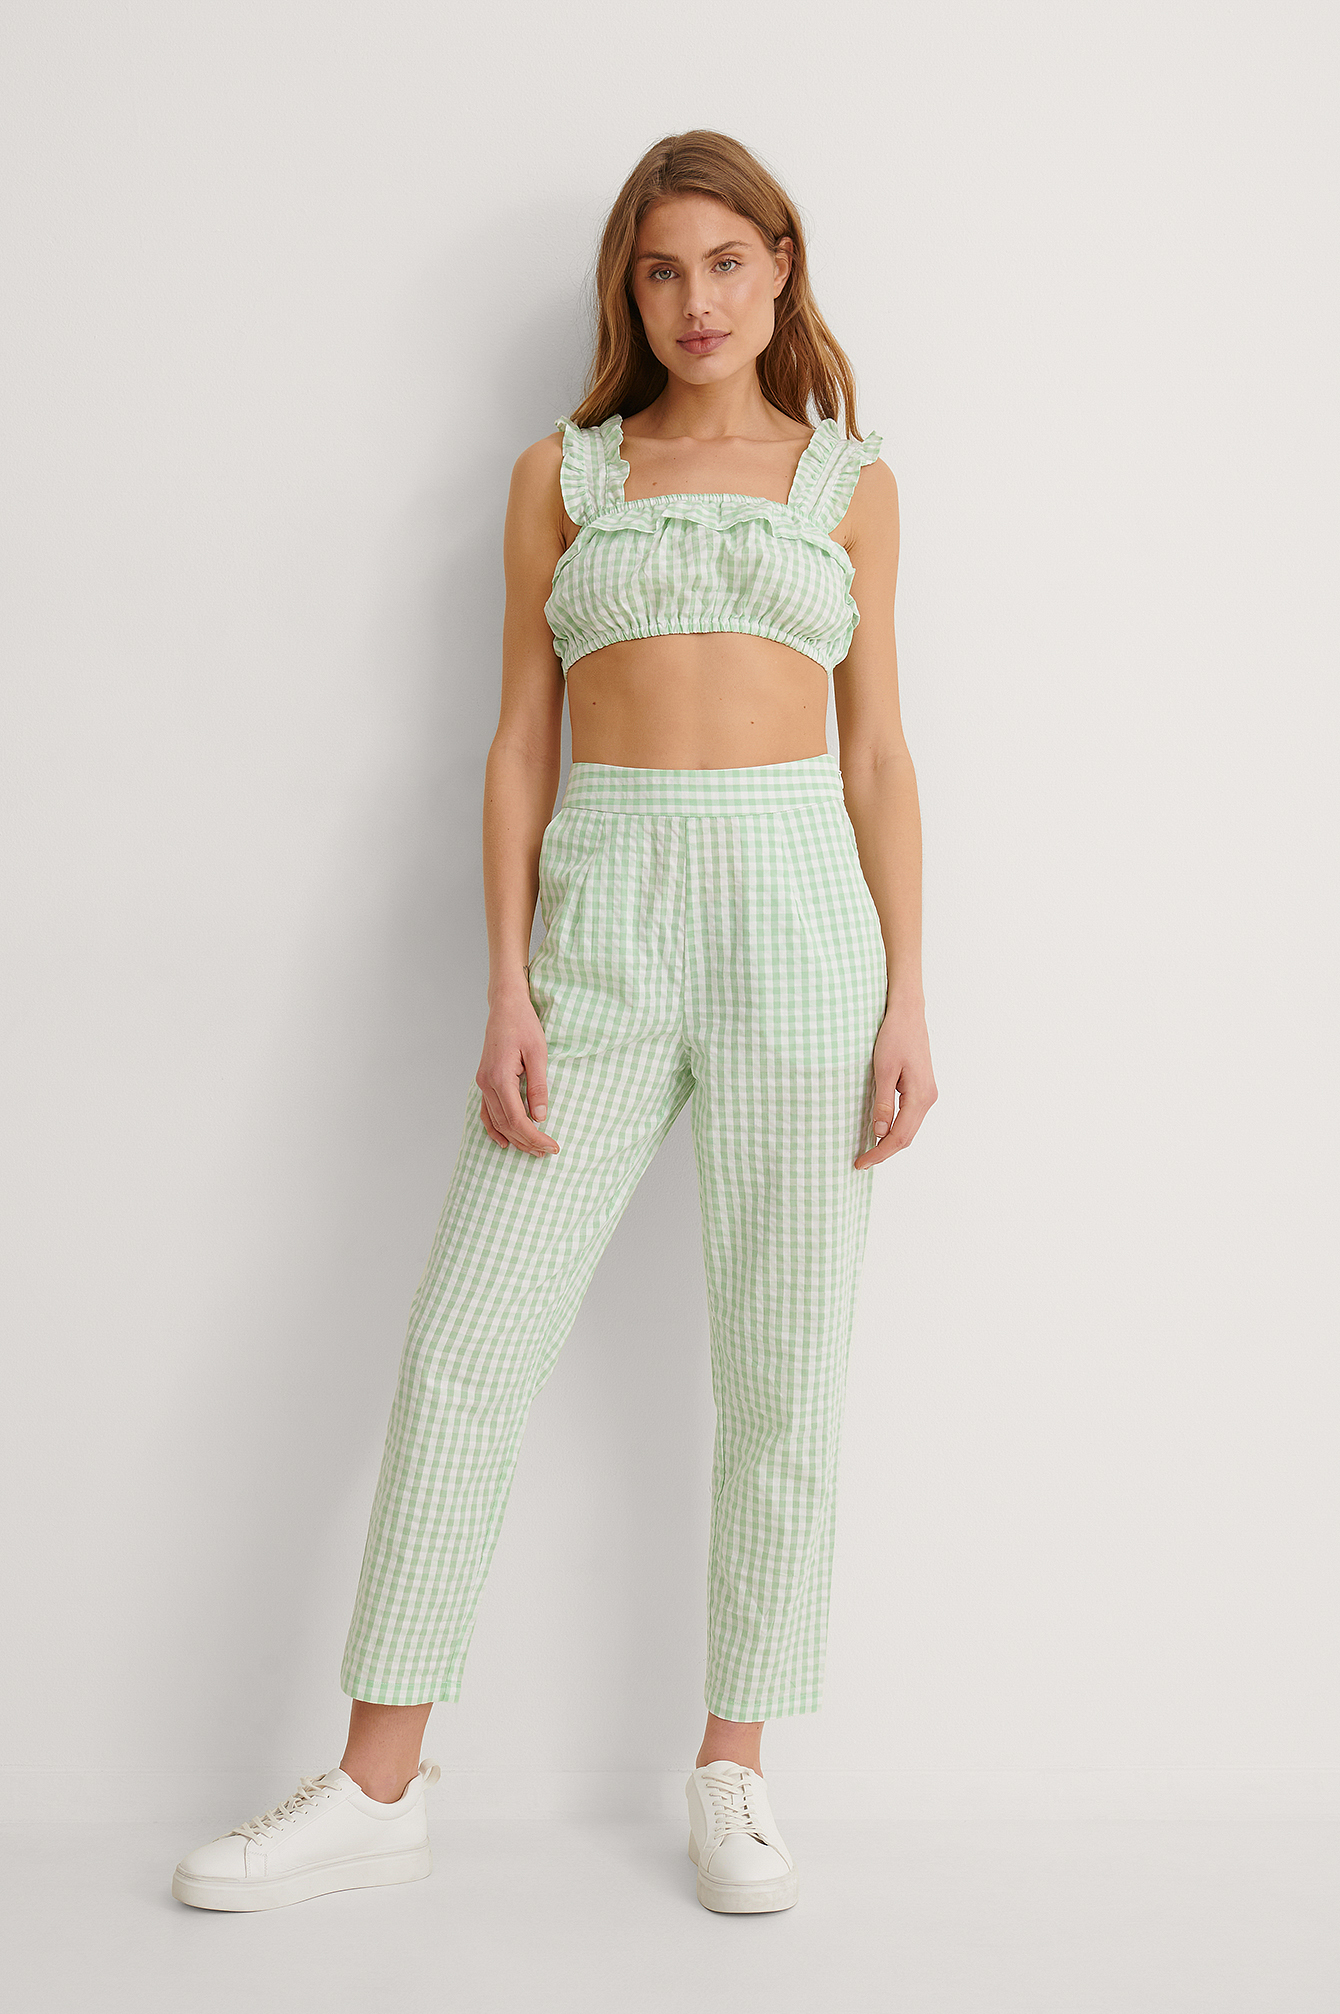 Cropped Gingham Pants Outfit.